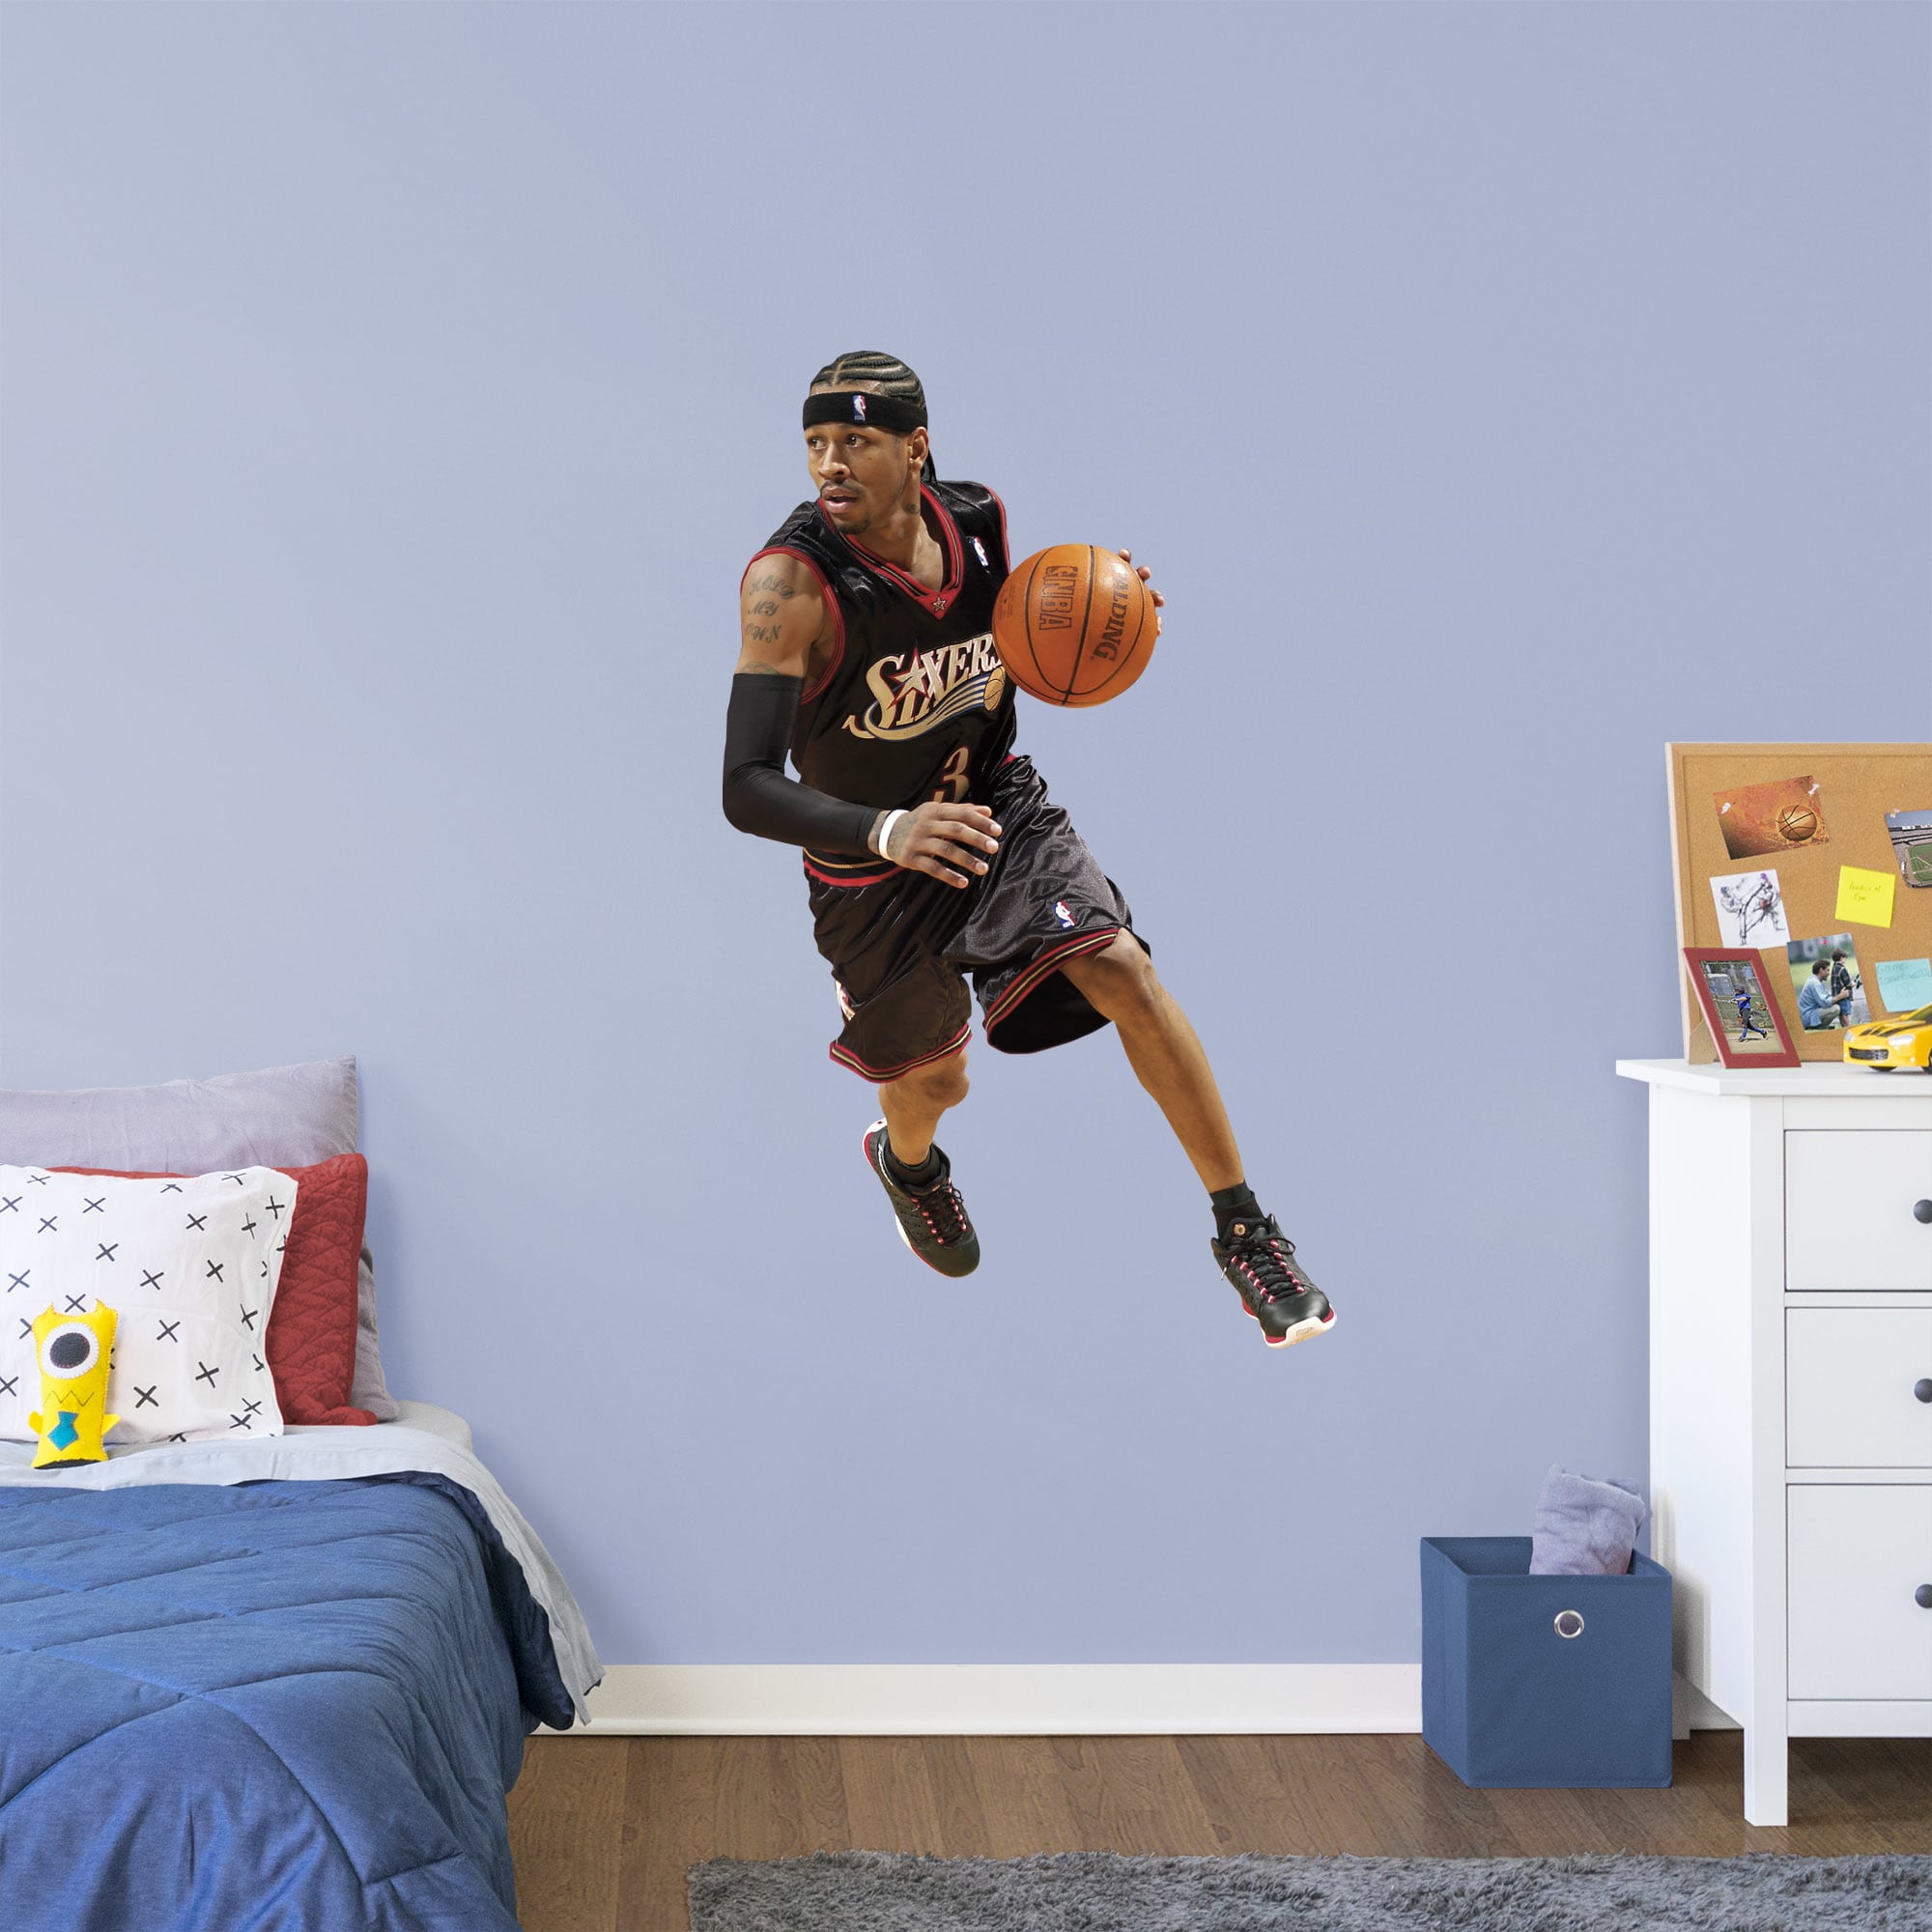 Allen Iverson for Philadelphia 76ers: Legend - Officially Licensed NBA Removable Wall Decal Giant Athlete + 2 Decals (31"W x 51"